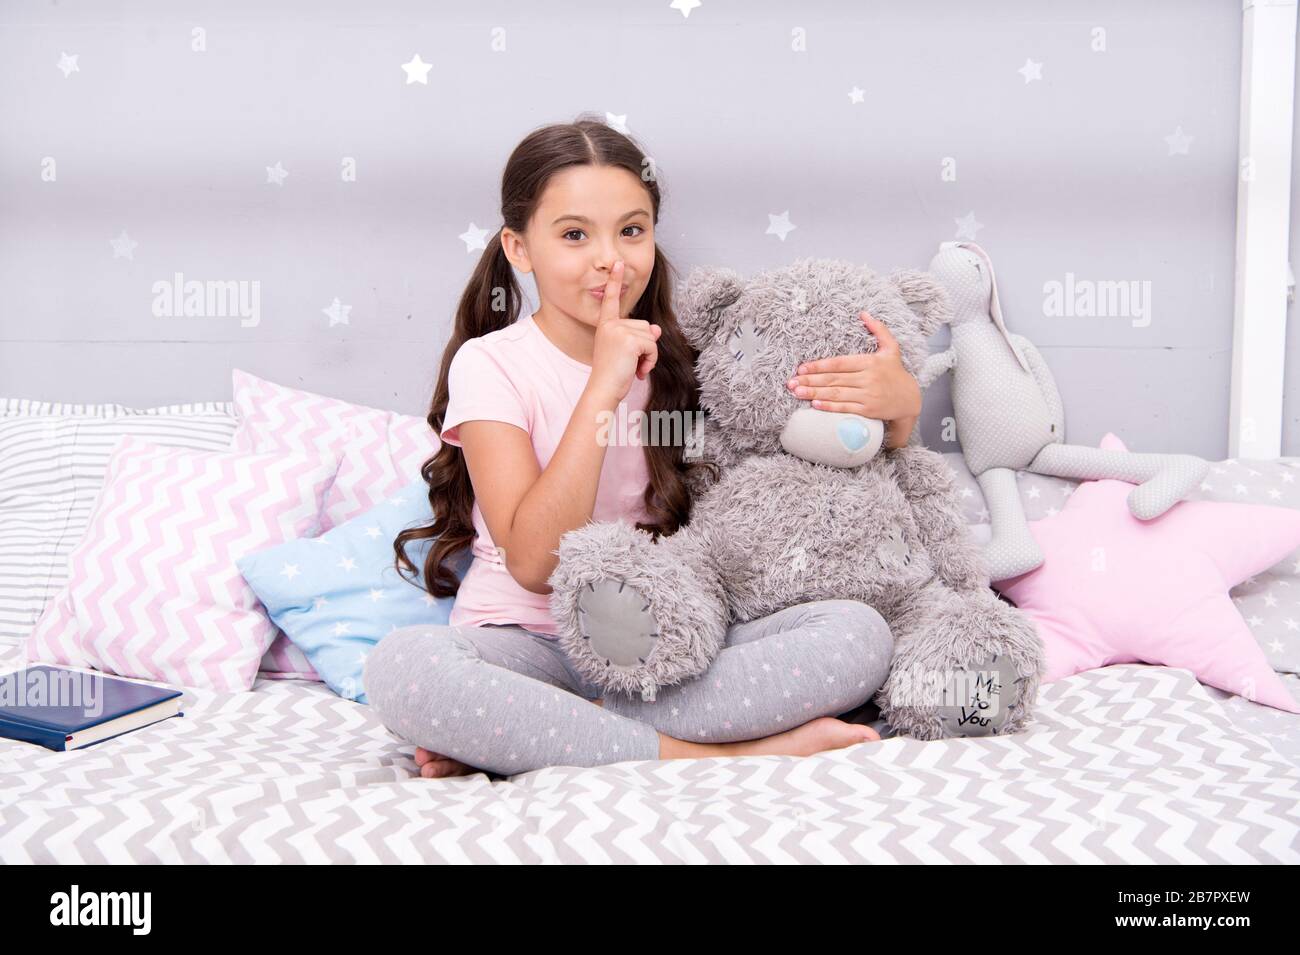 Girls secret. Cute kid show silence finger gesture. Little secret. Small girl play with teddy bear in bed. Keeping mouth shut. Being quiet. Silence and shushing. Top secret. Can you keep secret. Stock Photo